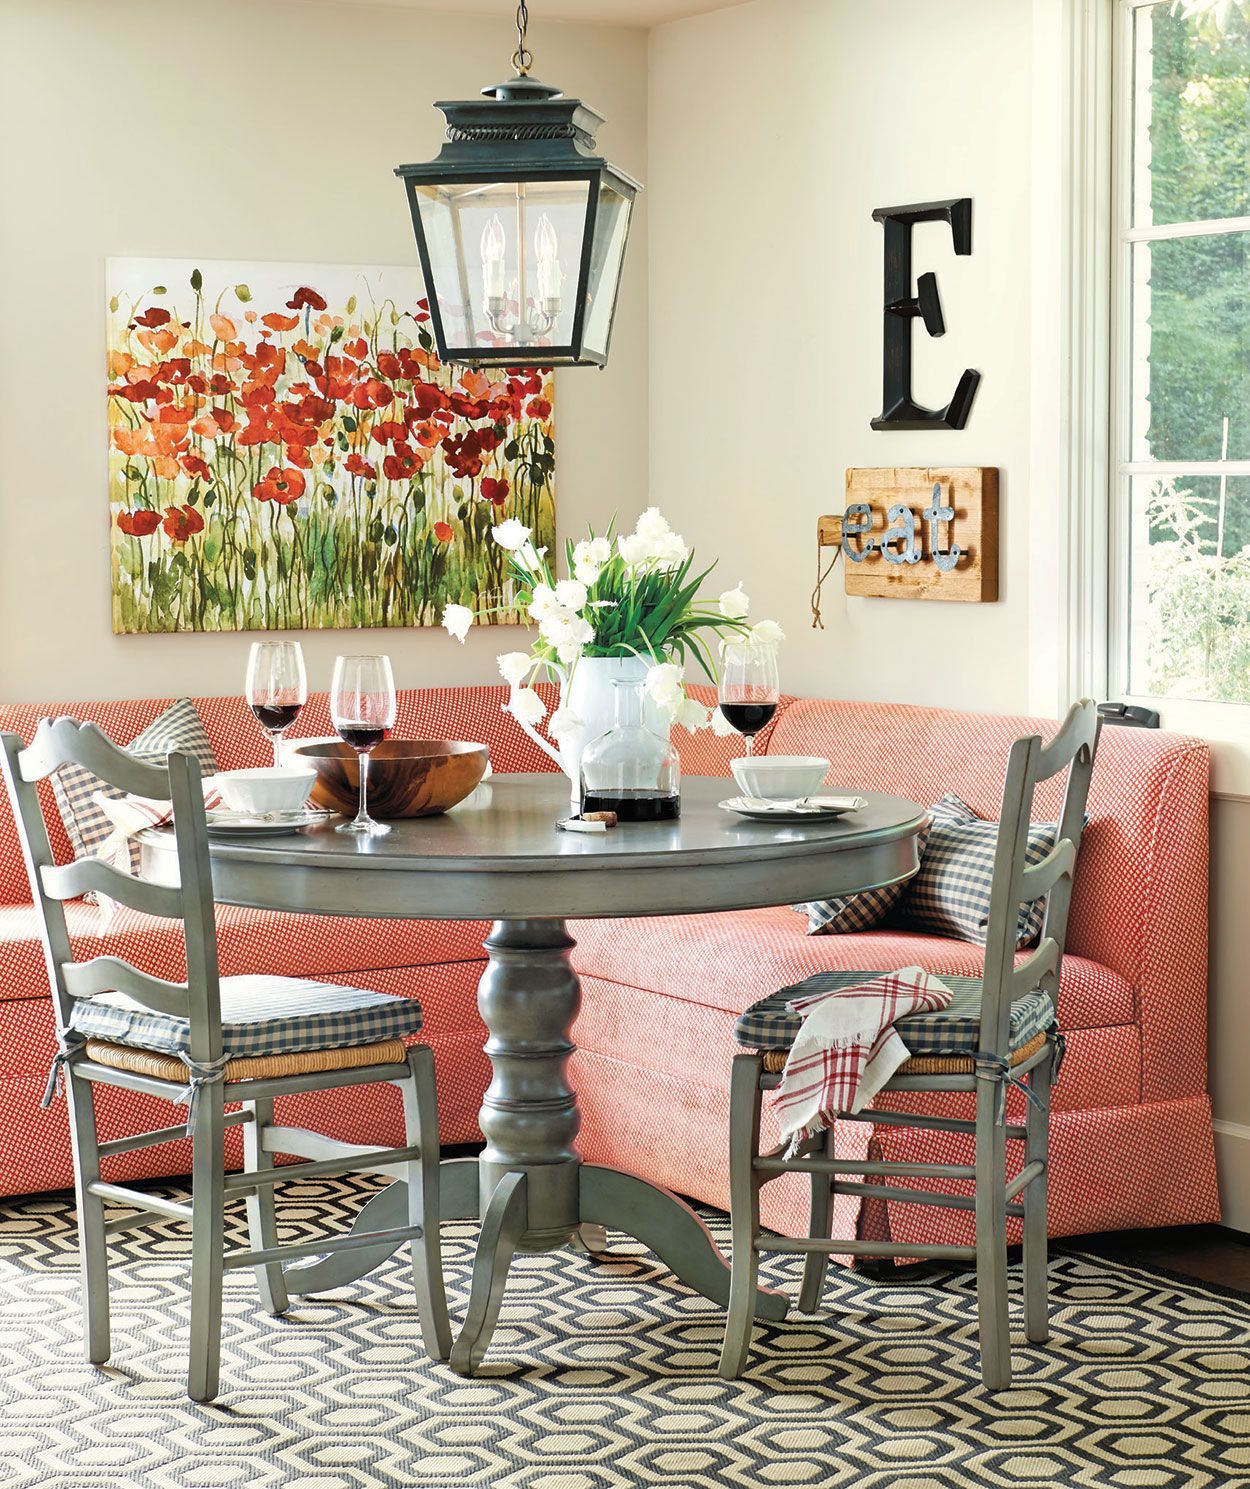 Not my fave colors, but love the idea of a small sectional as nook seating.